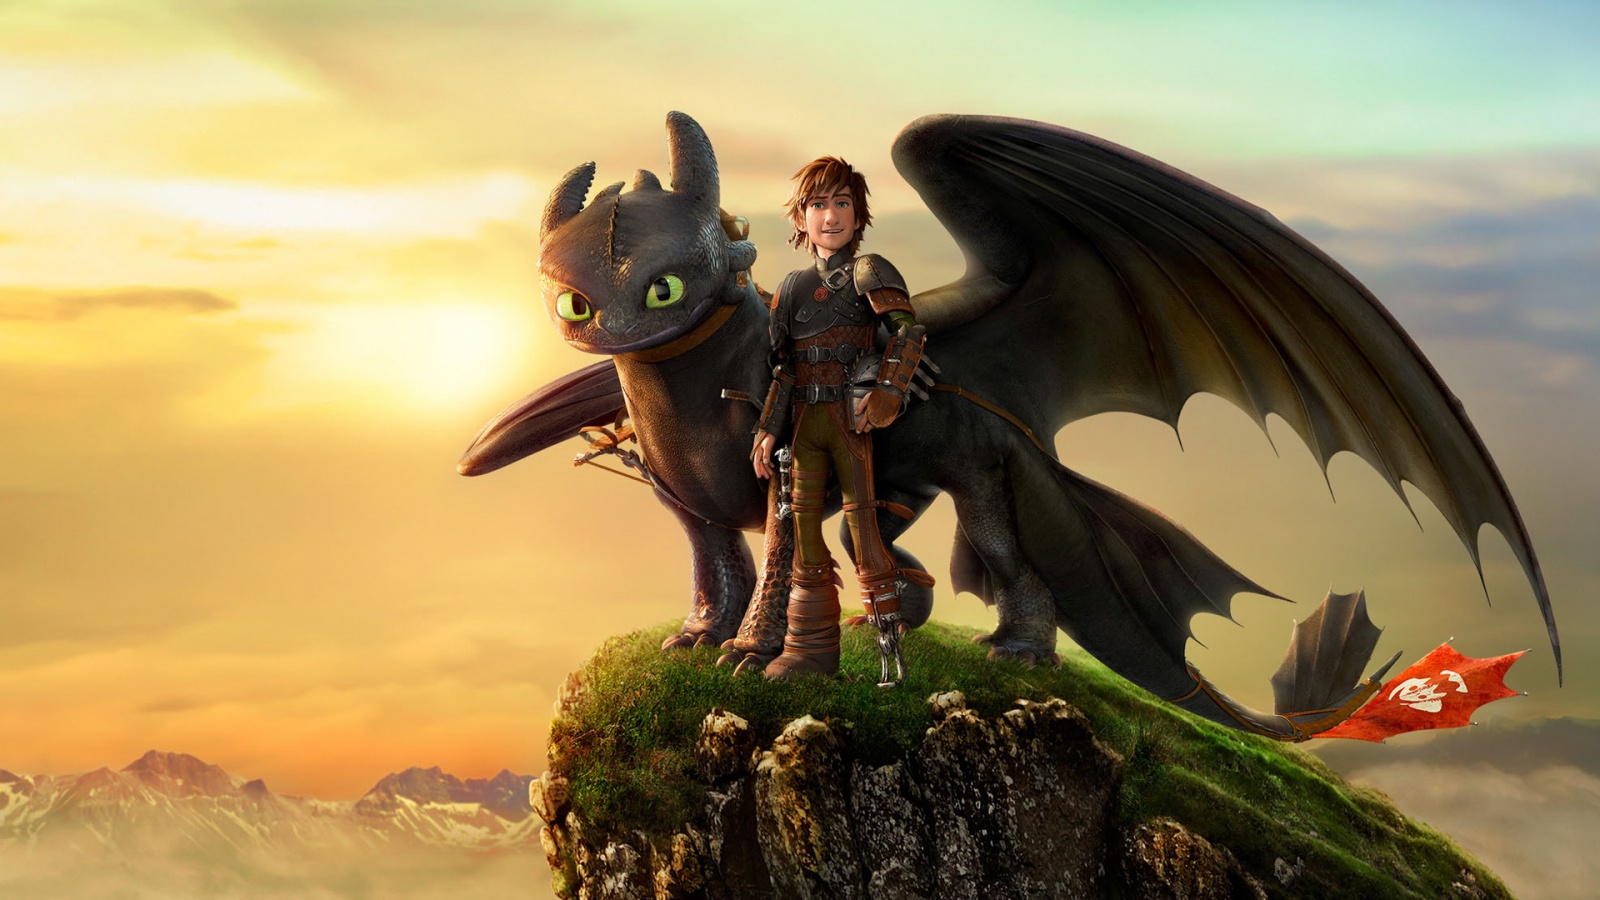 How To Train Your Dragon Wallpaper HD